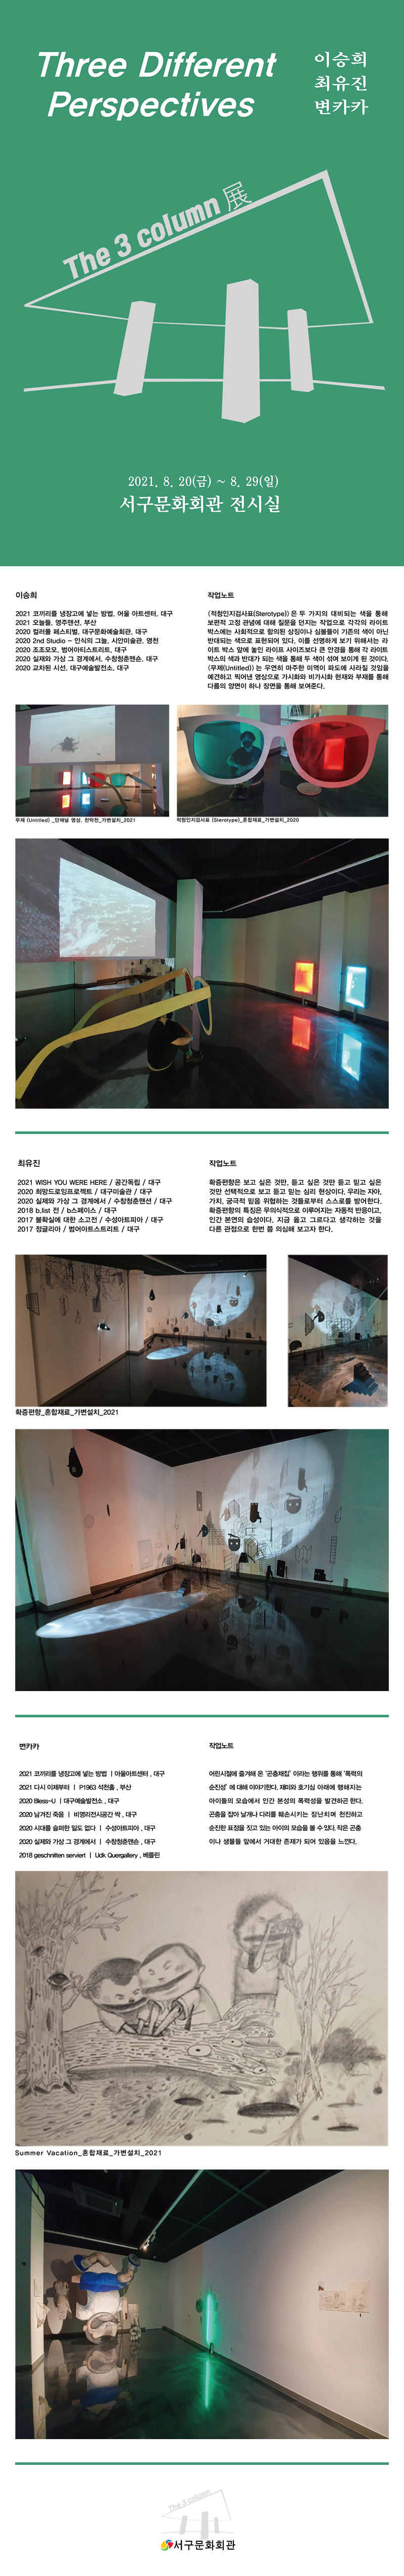 The 3Column展 「Three Different Perspectives」전시 안내 1